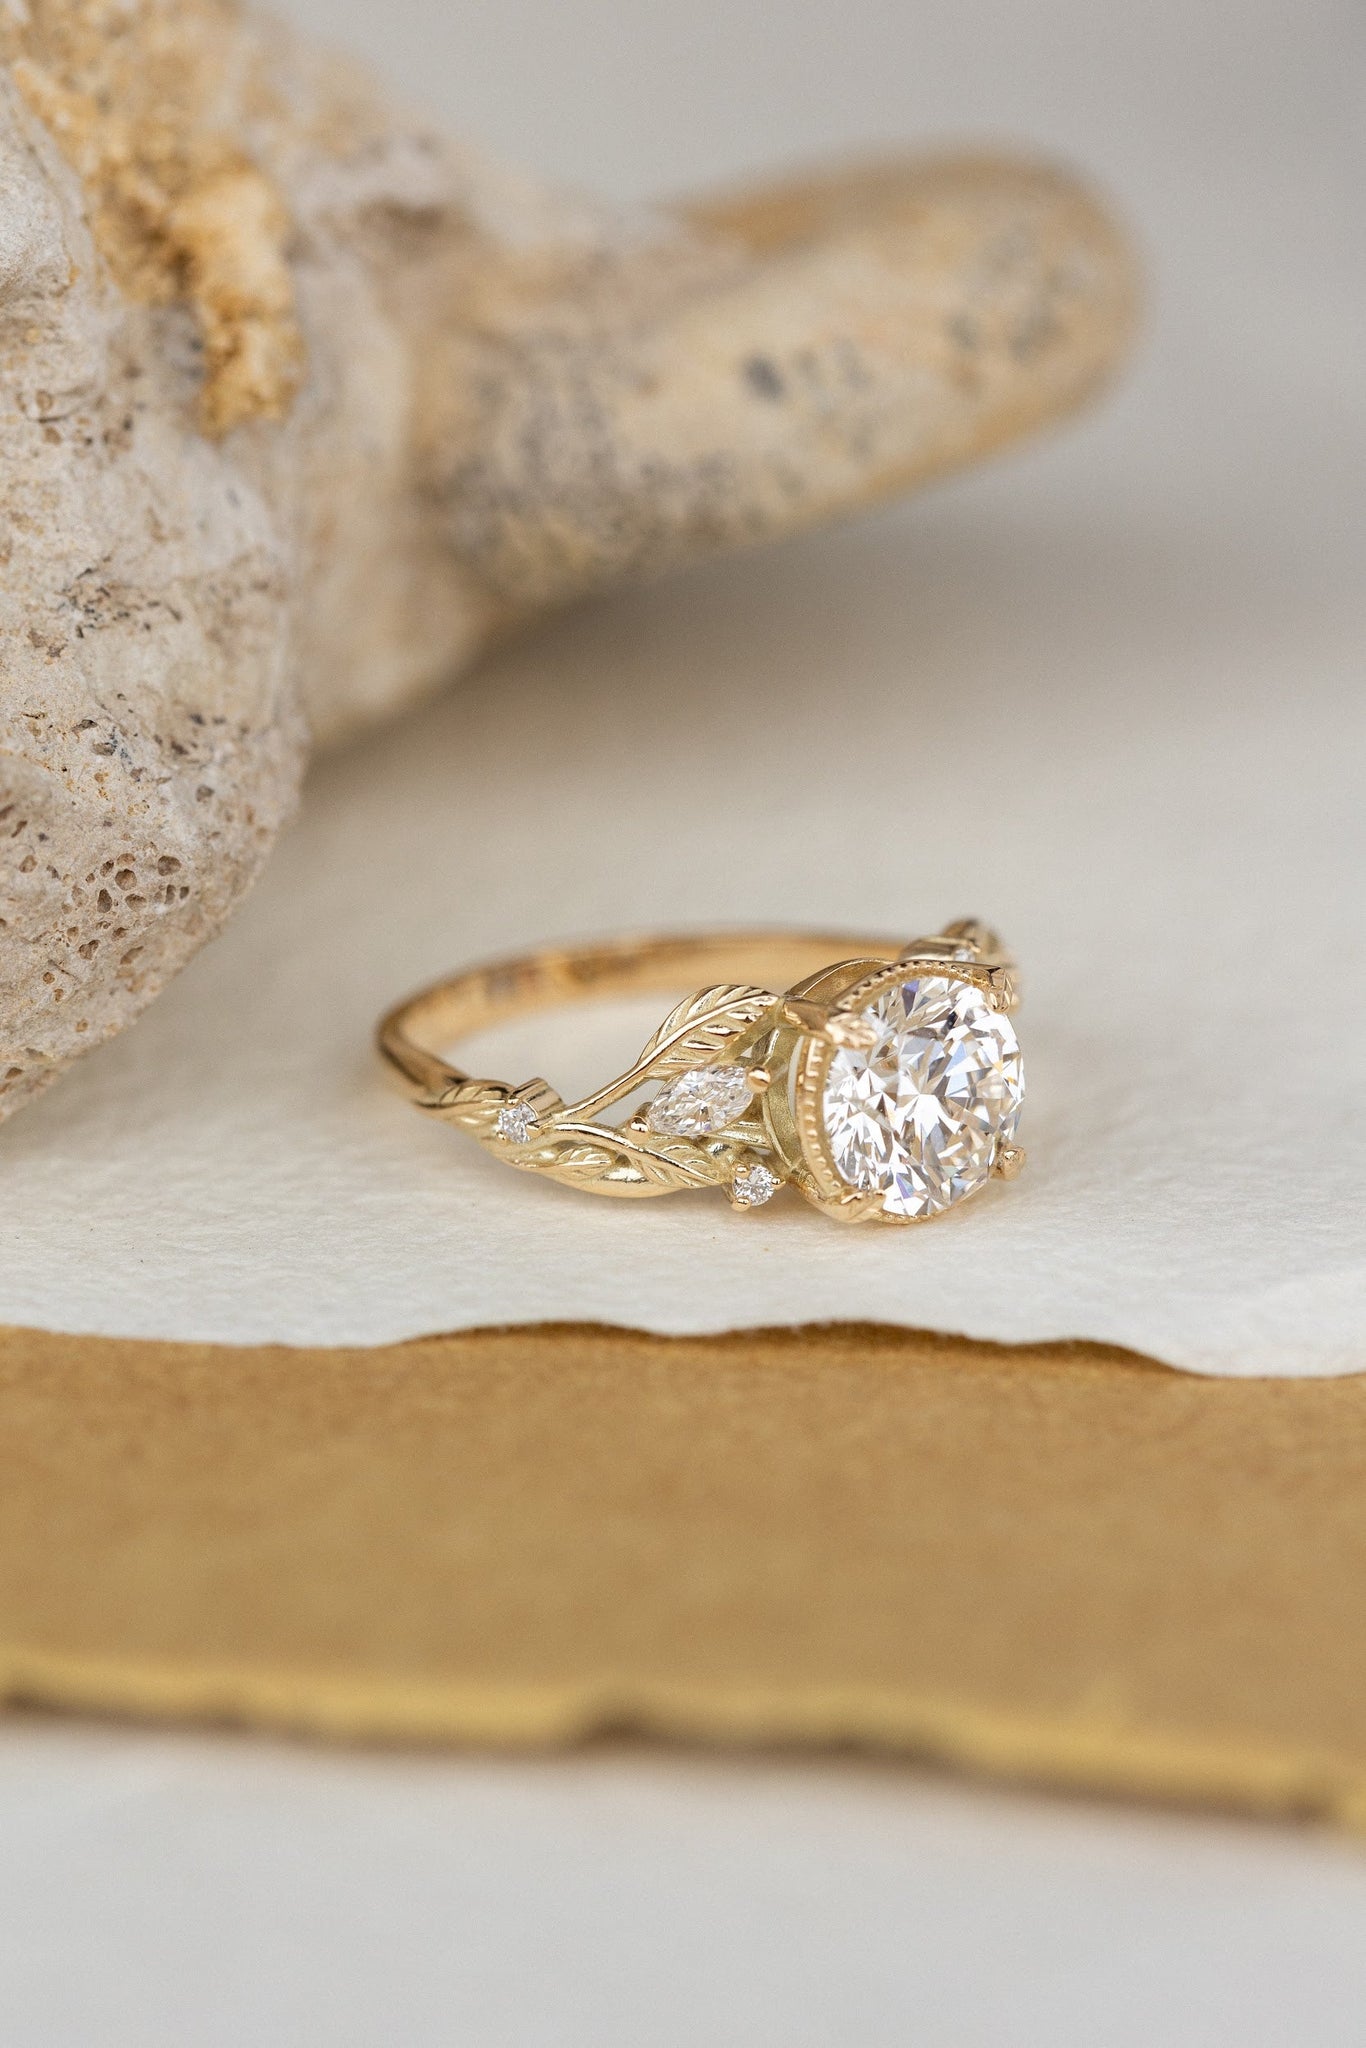 READY TO SHIP: Patricia ring in 14K yellow gold, lab grown diamond 7.5 mm, accent lab grown diamonds, AVAILABLE RING SIZES: 6-8US - Eden Garden Jewelry™